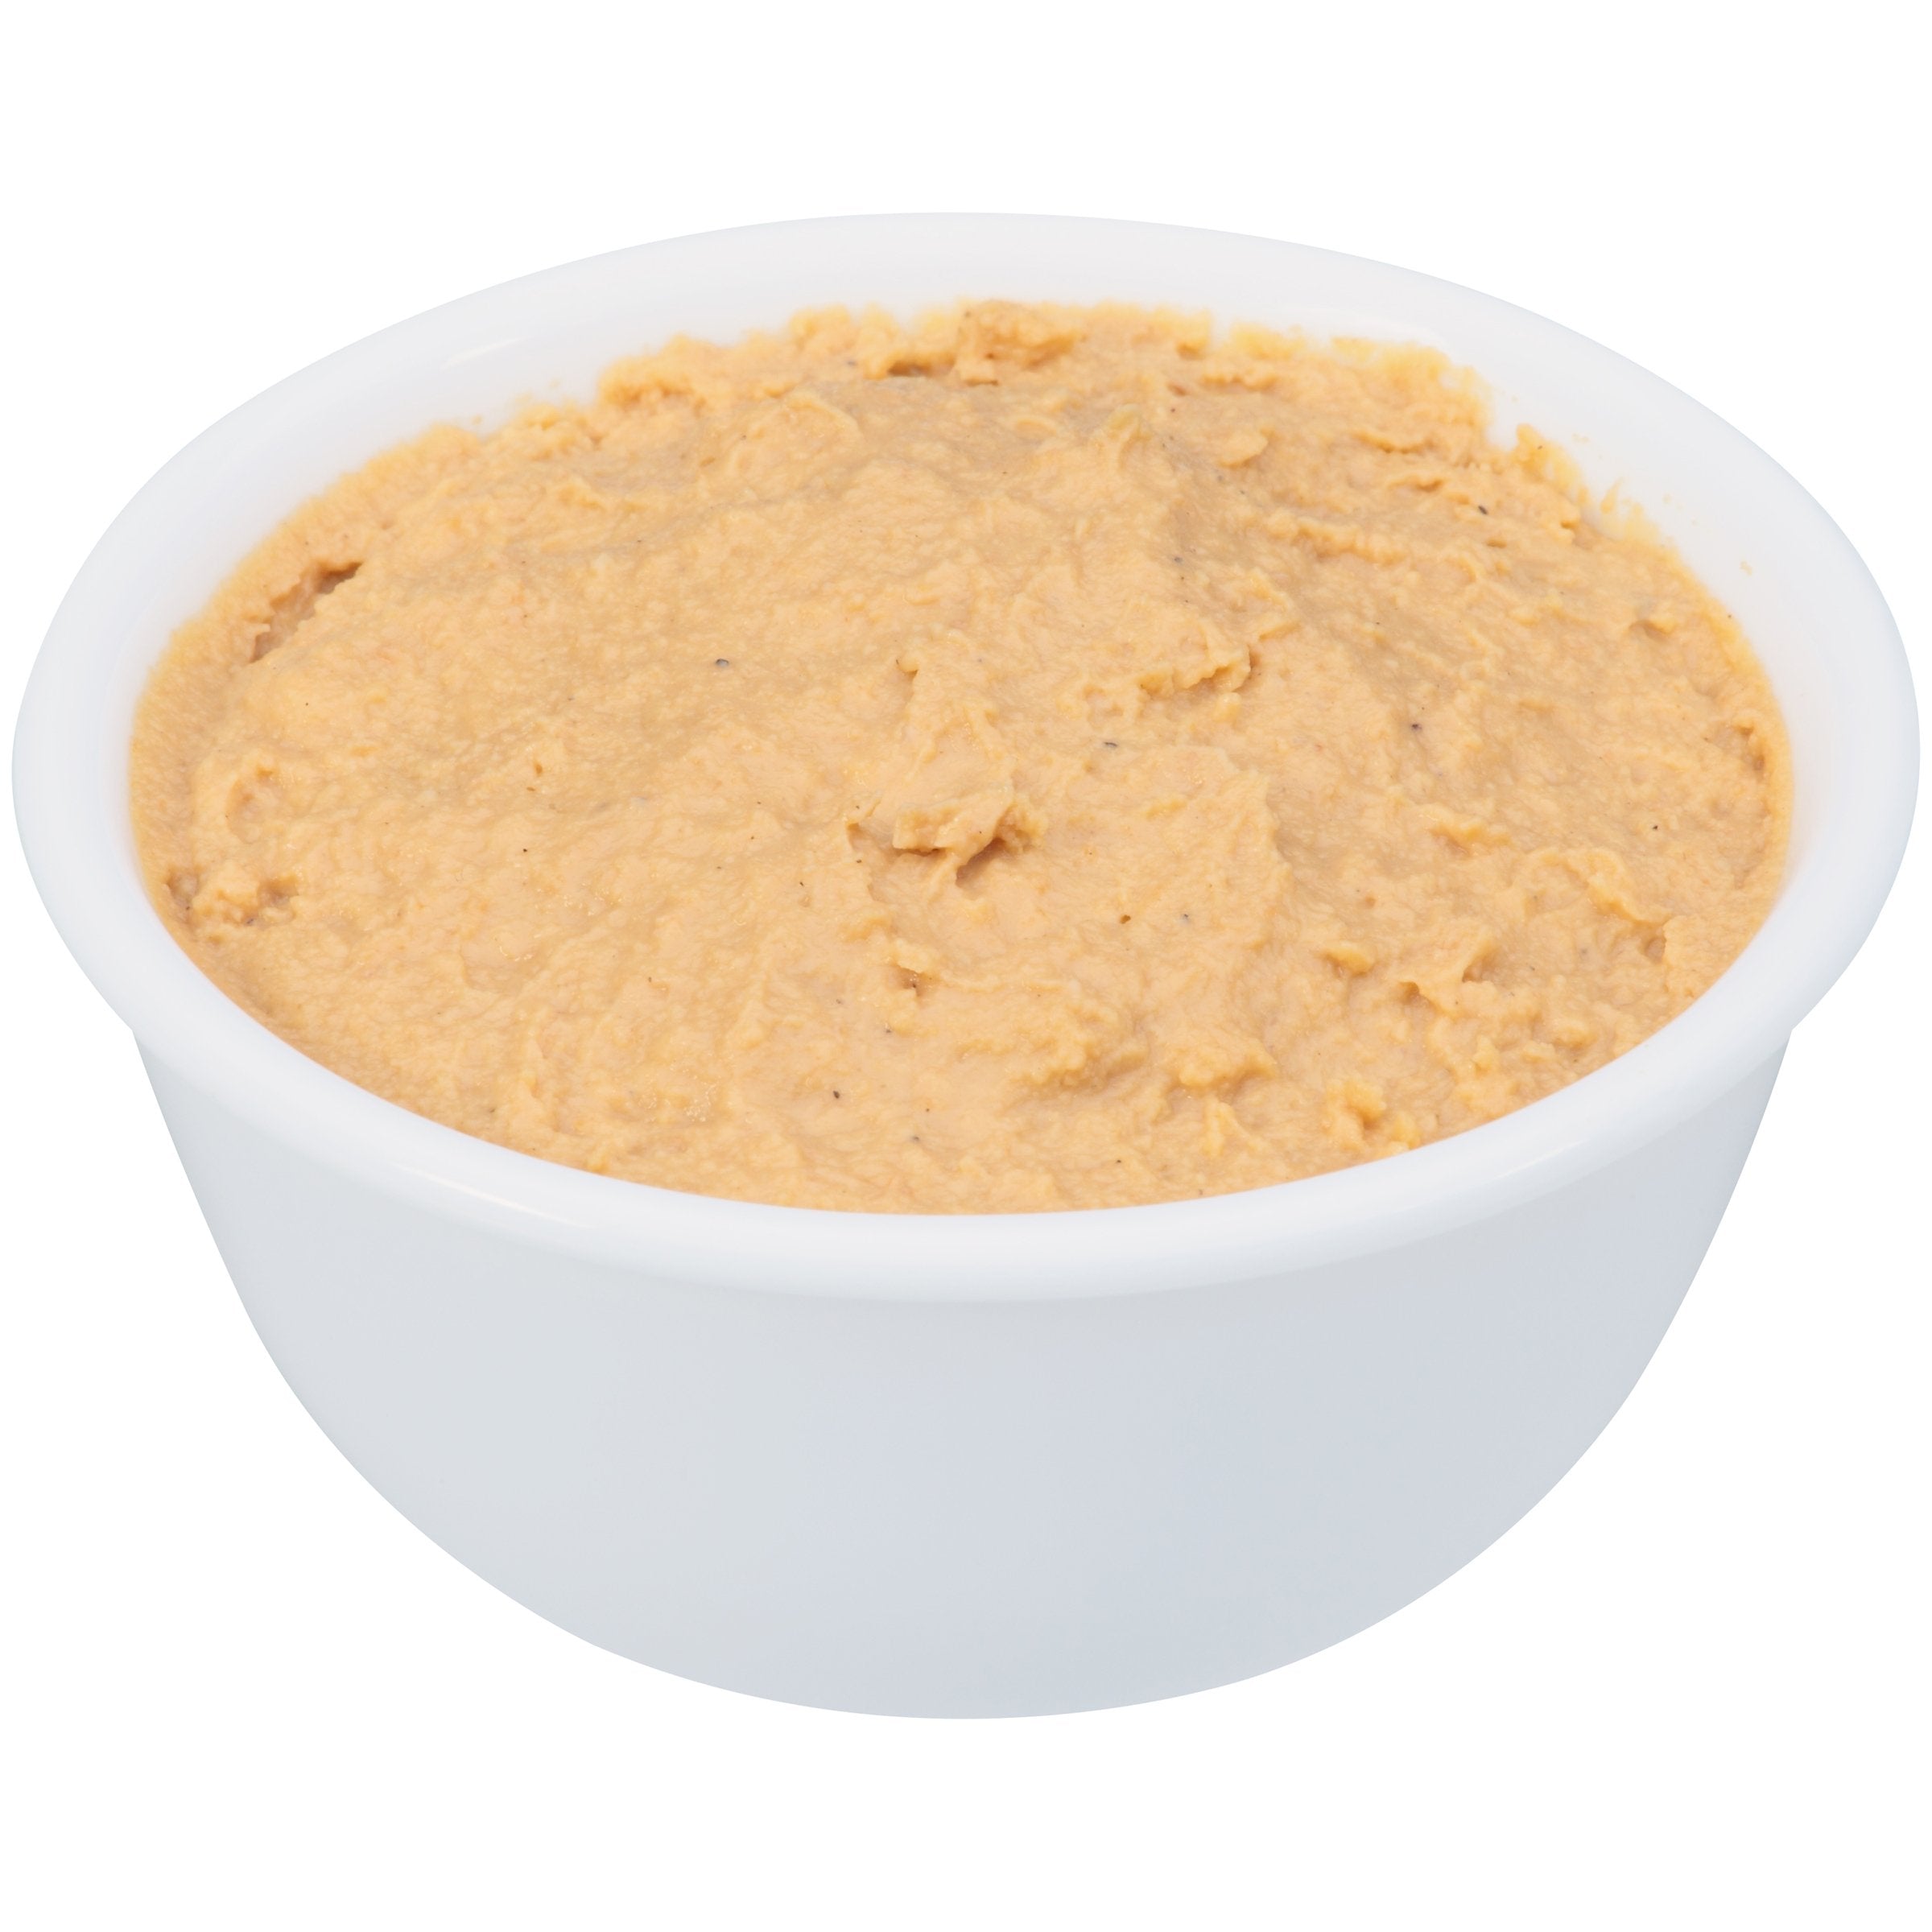 Thickened Food Thick-It 15 oz. Can Sausage / Cheese Omelet Flavor Puree IDDSI Level 4 Extremely Thick/Pureed